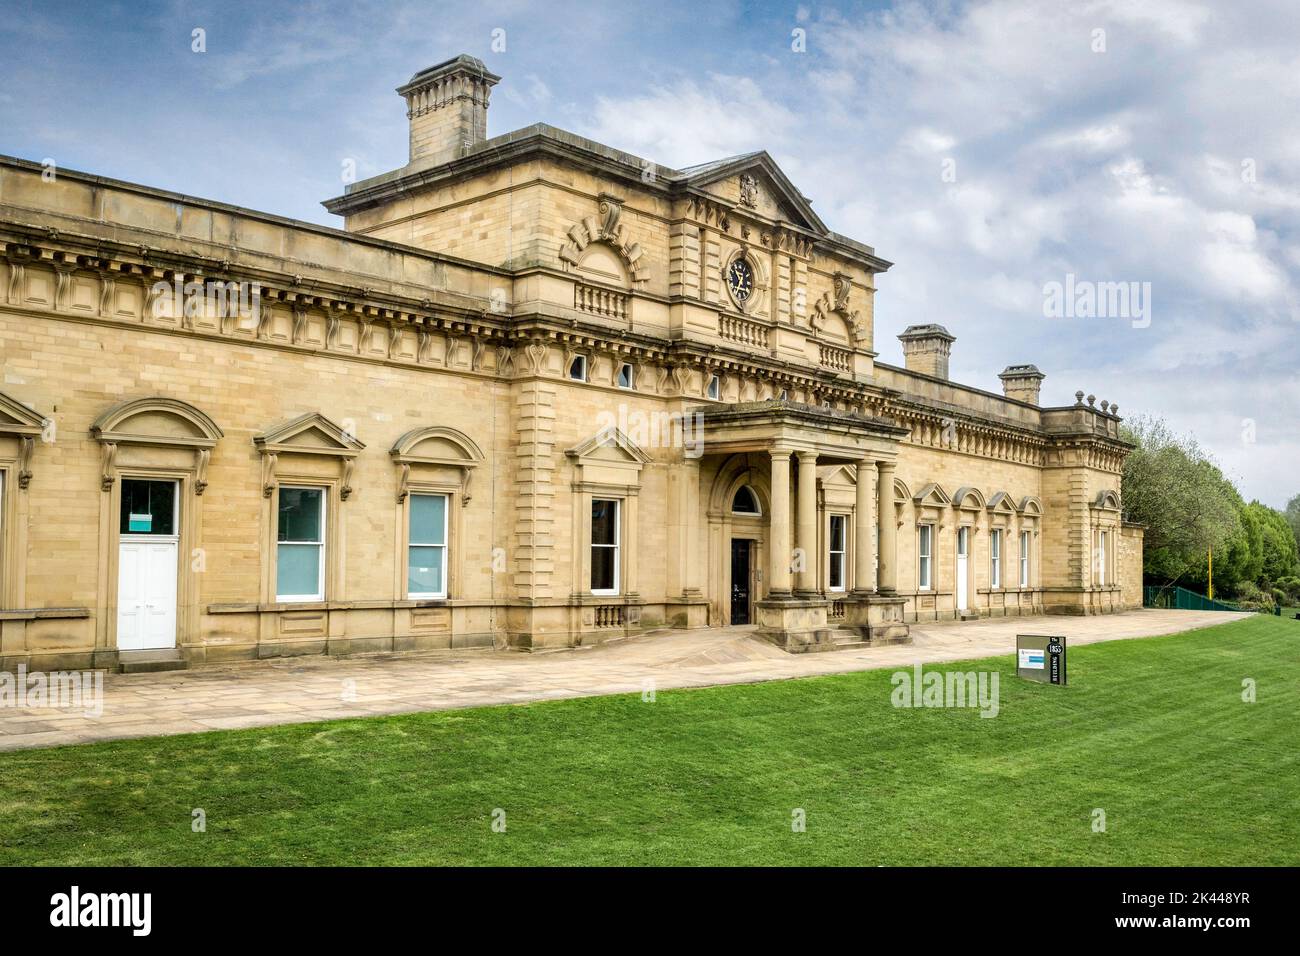 28 April 2022: Halifax, West Yorkshire - The 1855 Building, formerly the railway station and now housing various community support groups, in Halifax, Stock Photo